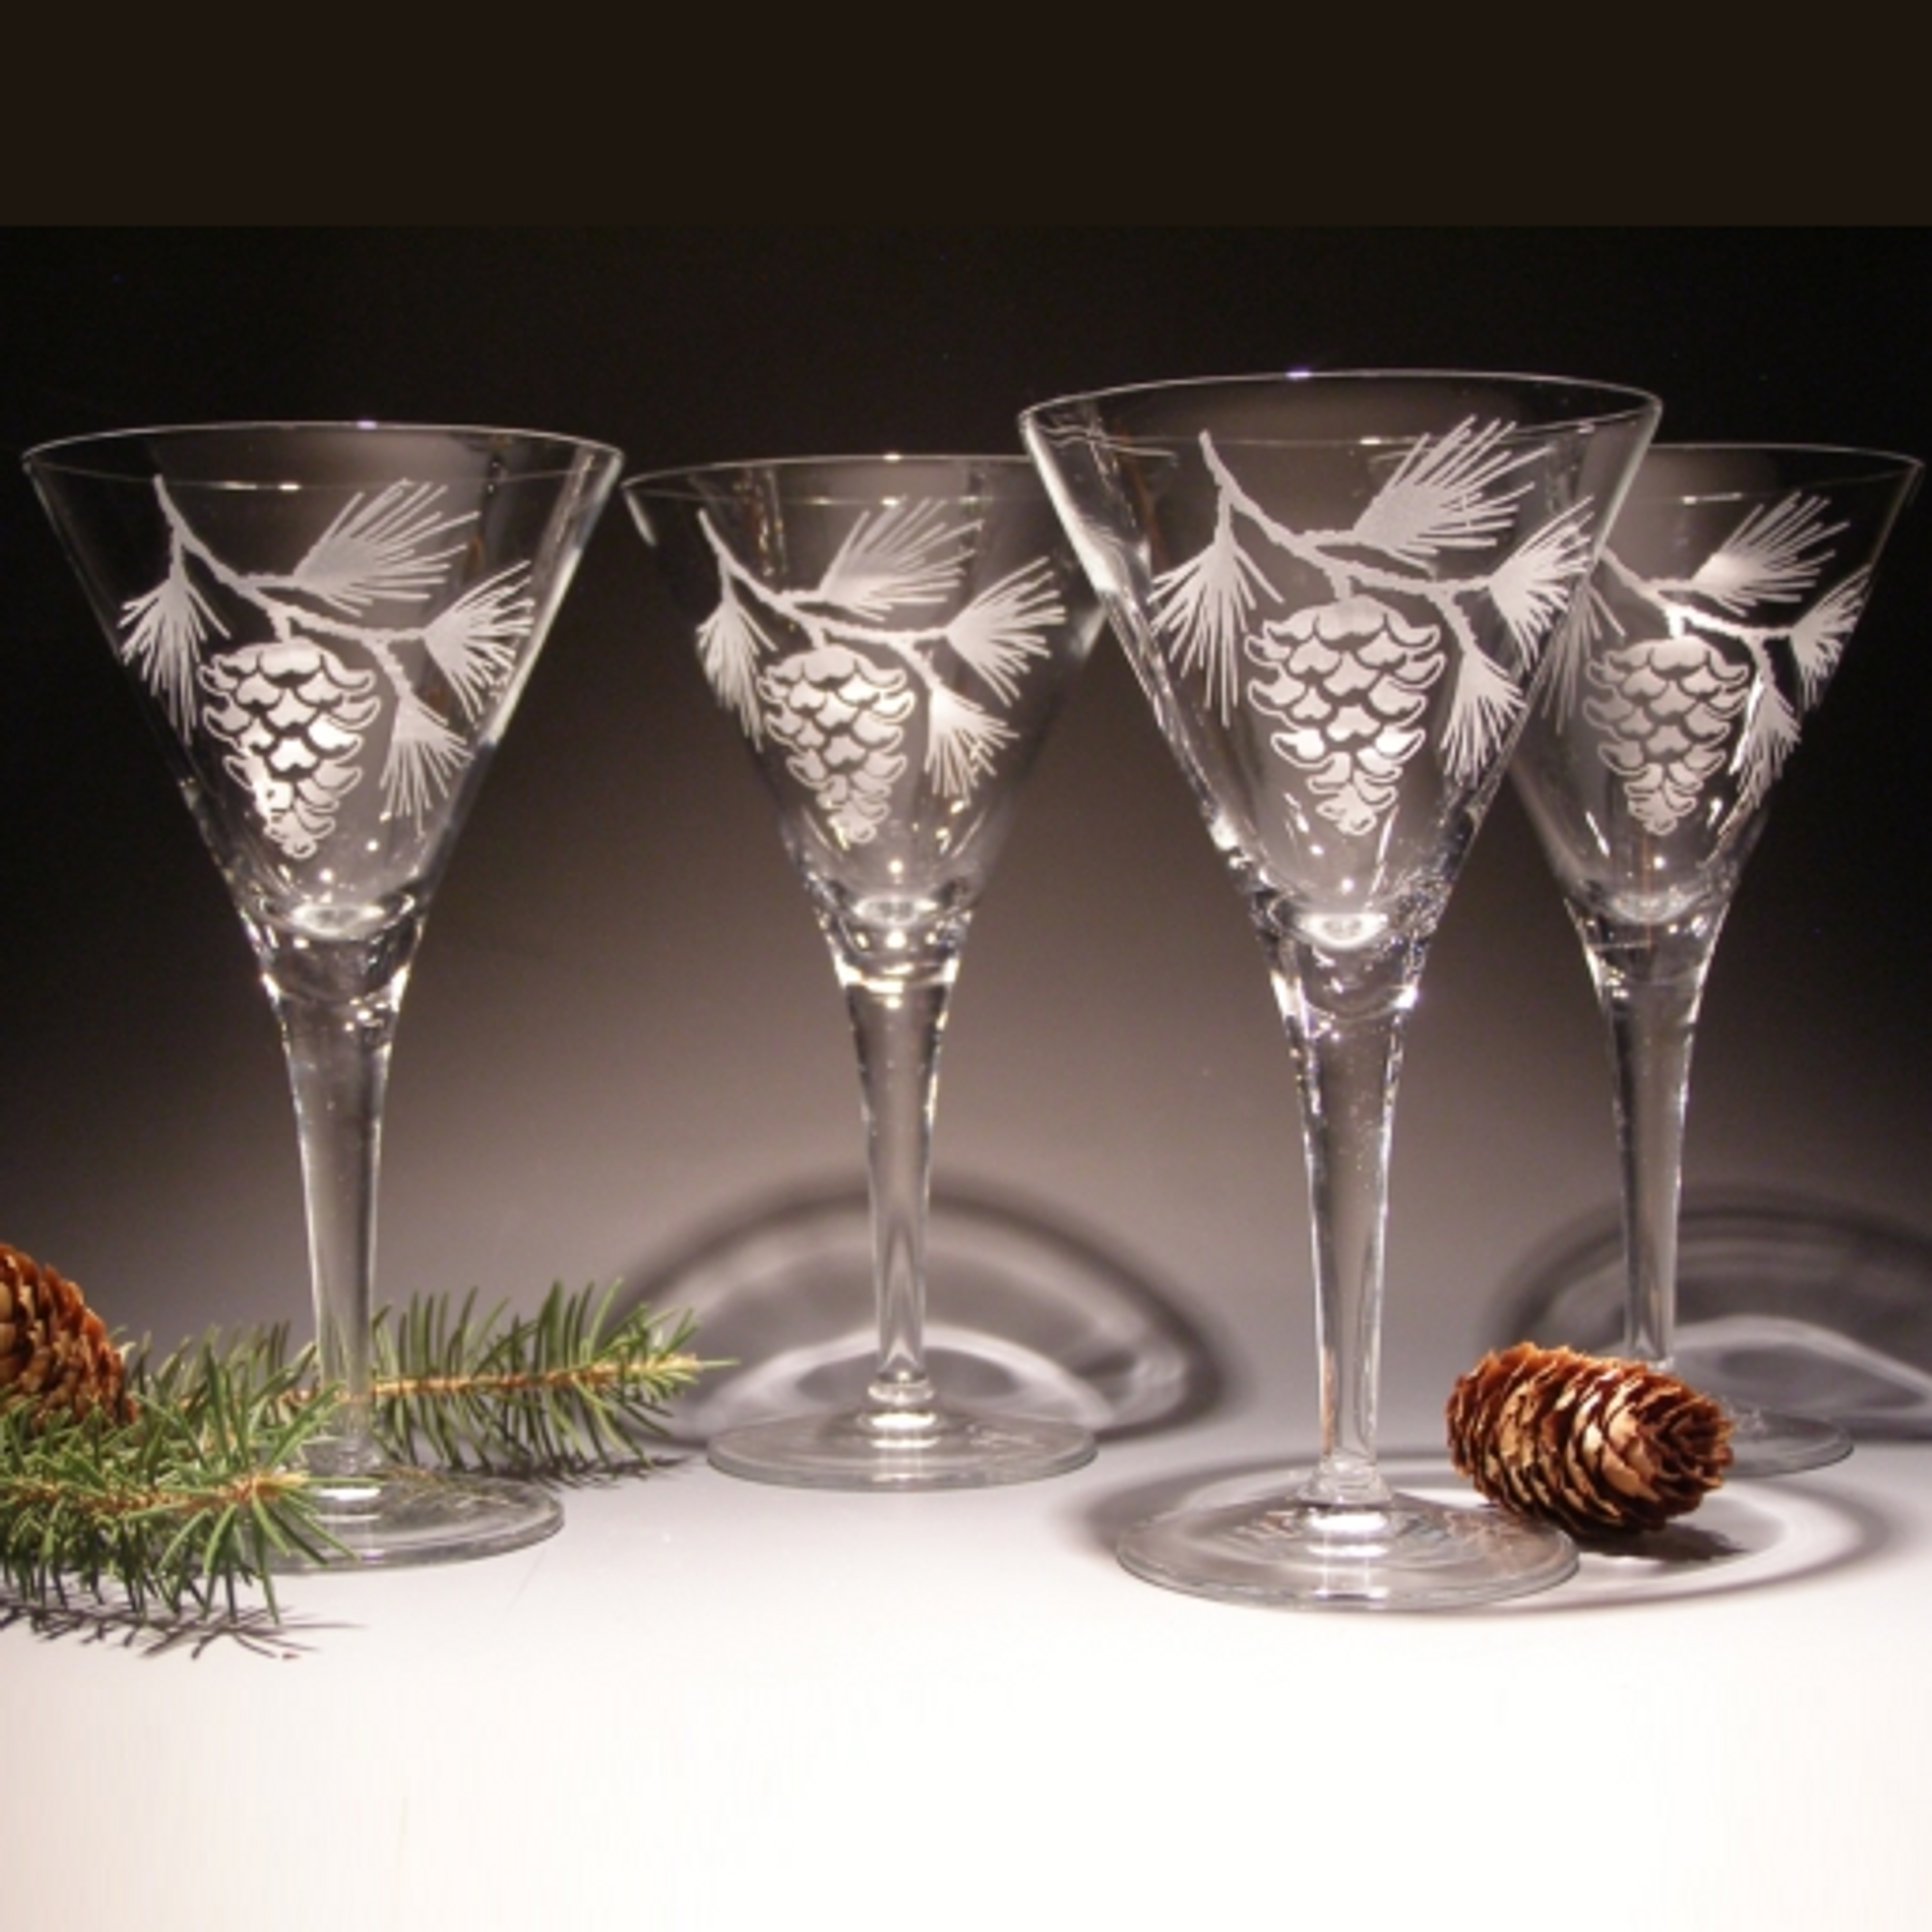 https://cdn11.bigcommerce.com/s-ob7m2s98/images/stencil/2000x2000/products/16909/55540/PINECONE_MARTINI_GLASS__66575.1573953284.png?c=2